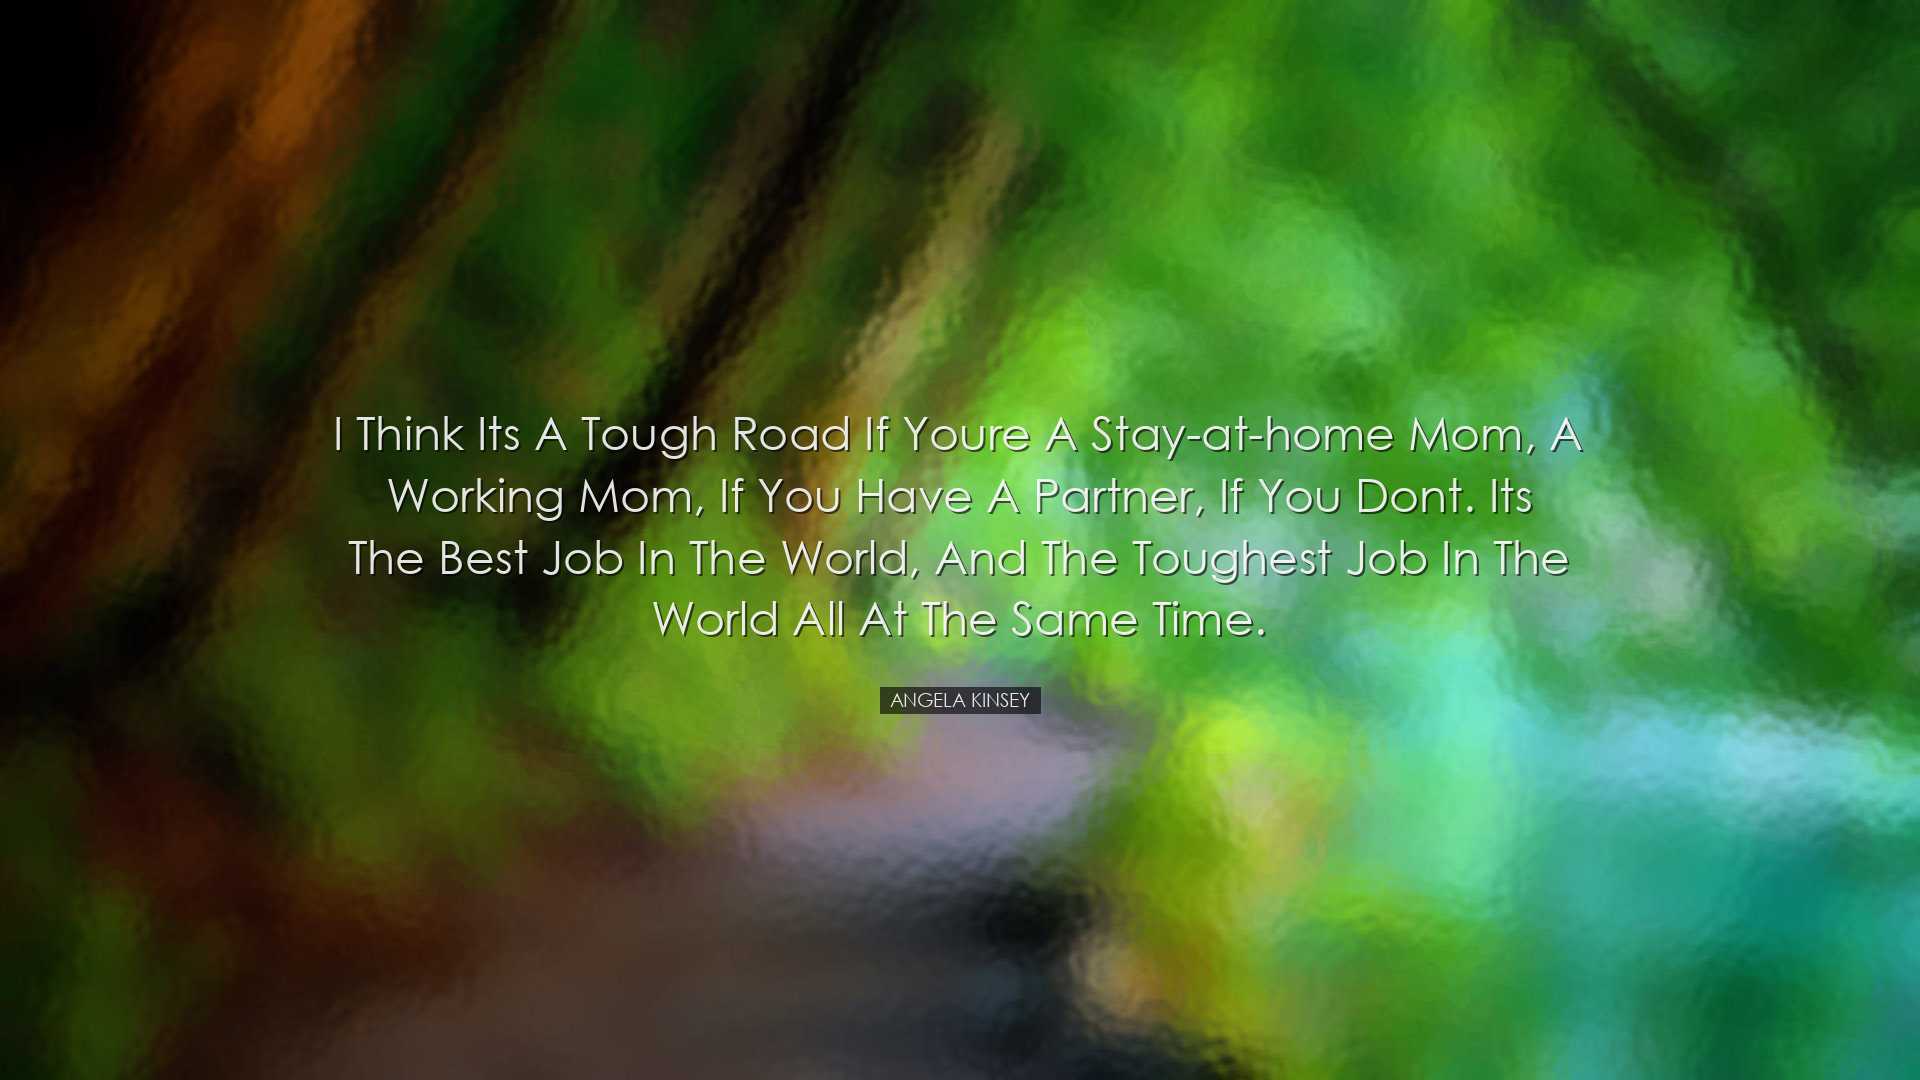 I think its a tough road if youre a stay-at-home mom, a working mo